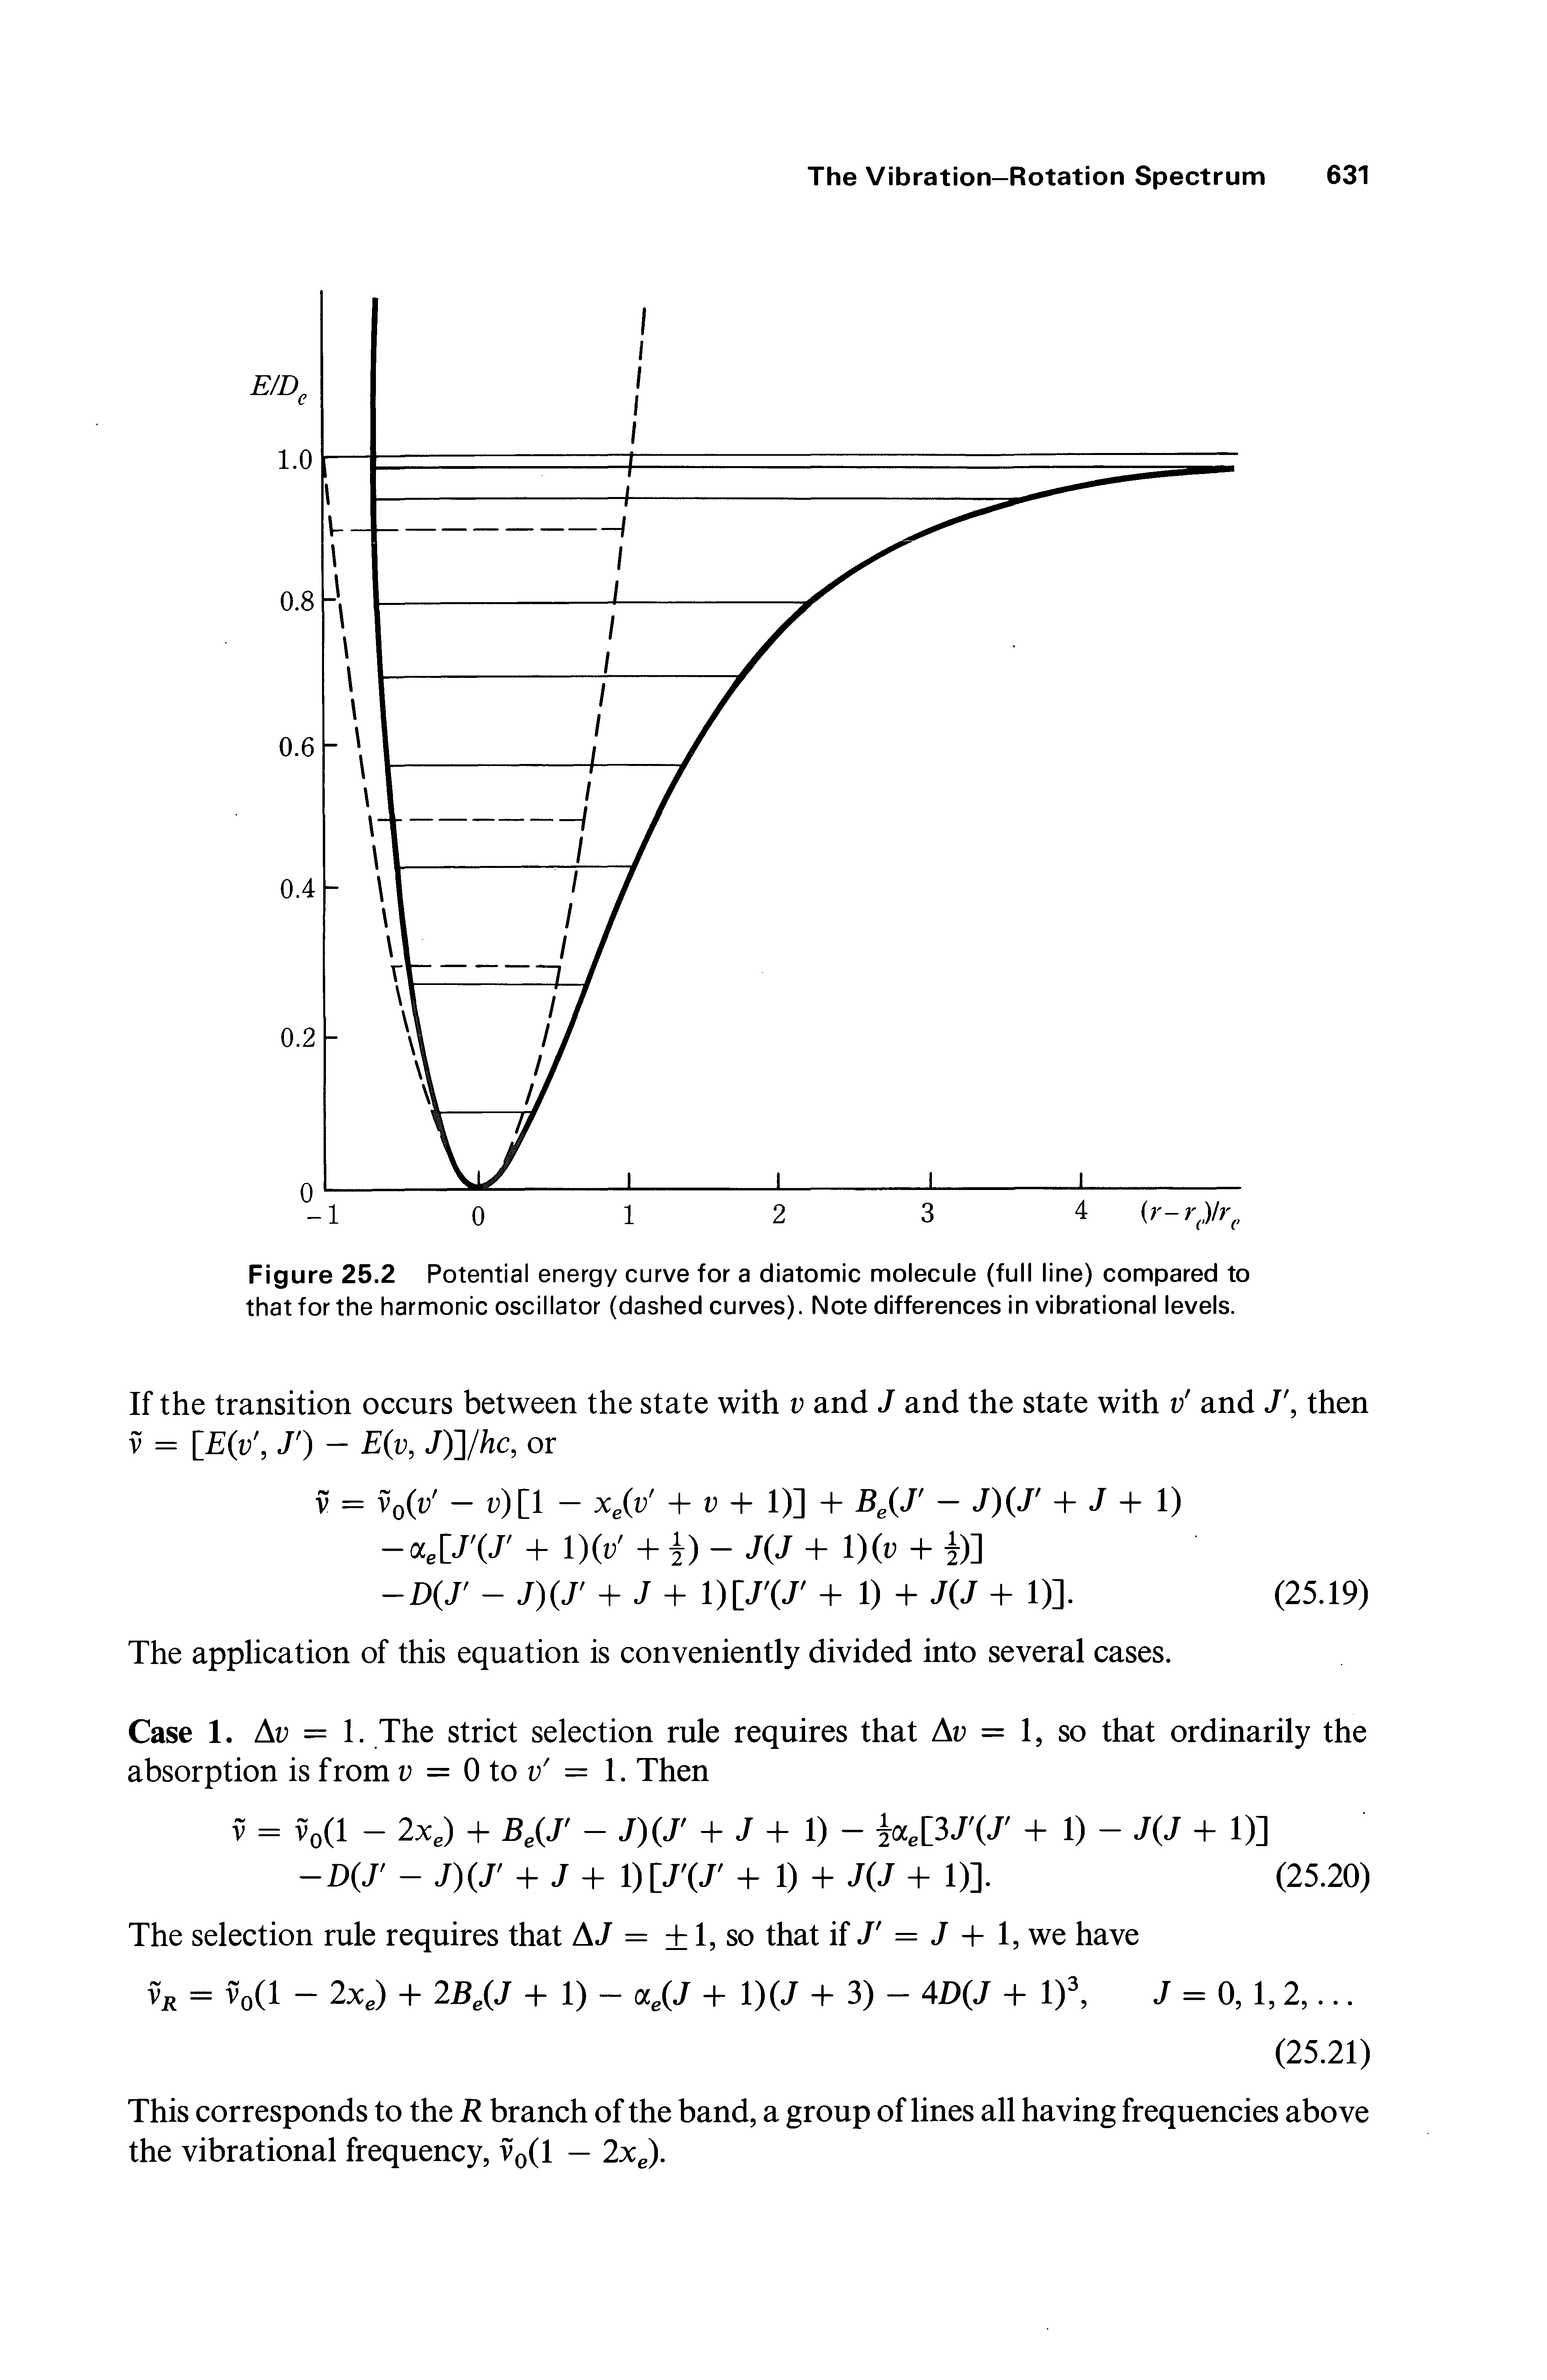 Figure 25.2 Potential energy curve for a diatomic molecule (full line) compared to that for the harmonic oscillator (dashed curves). Note differences in vibrational levels.